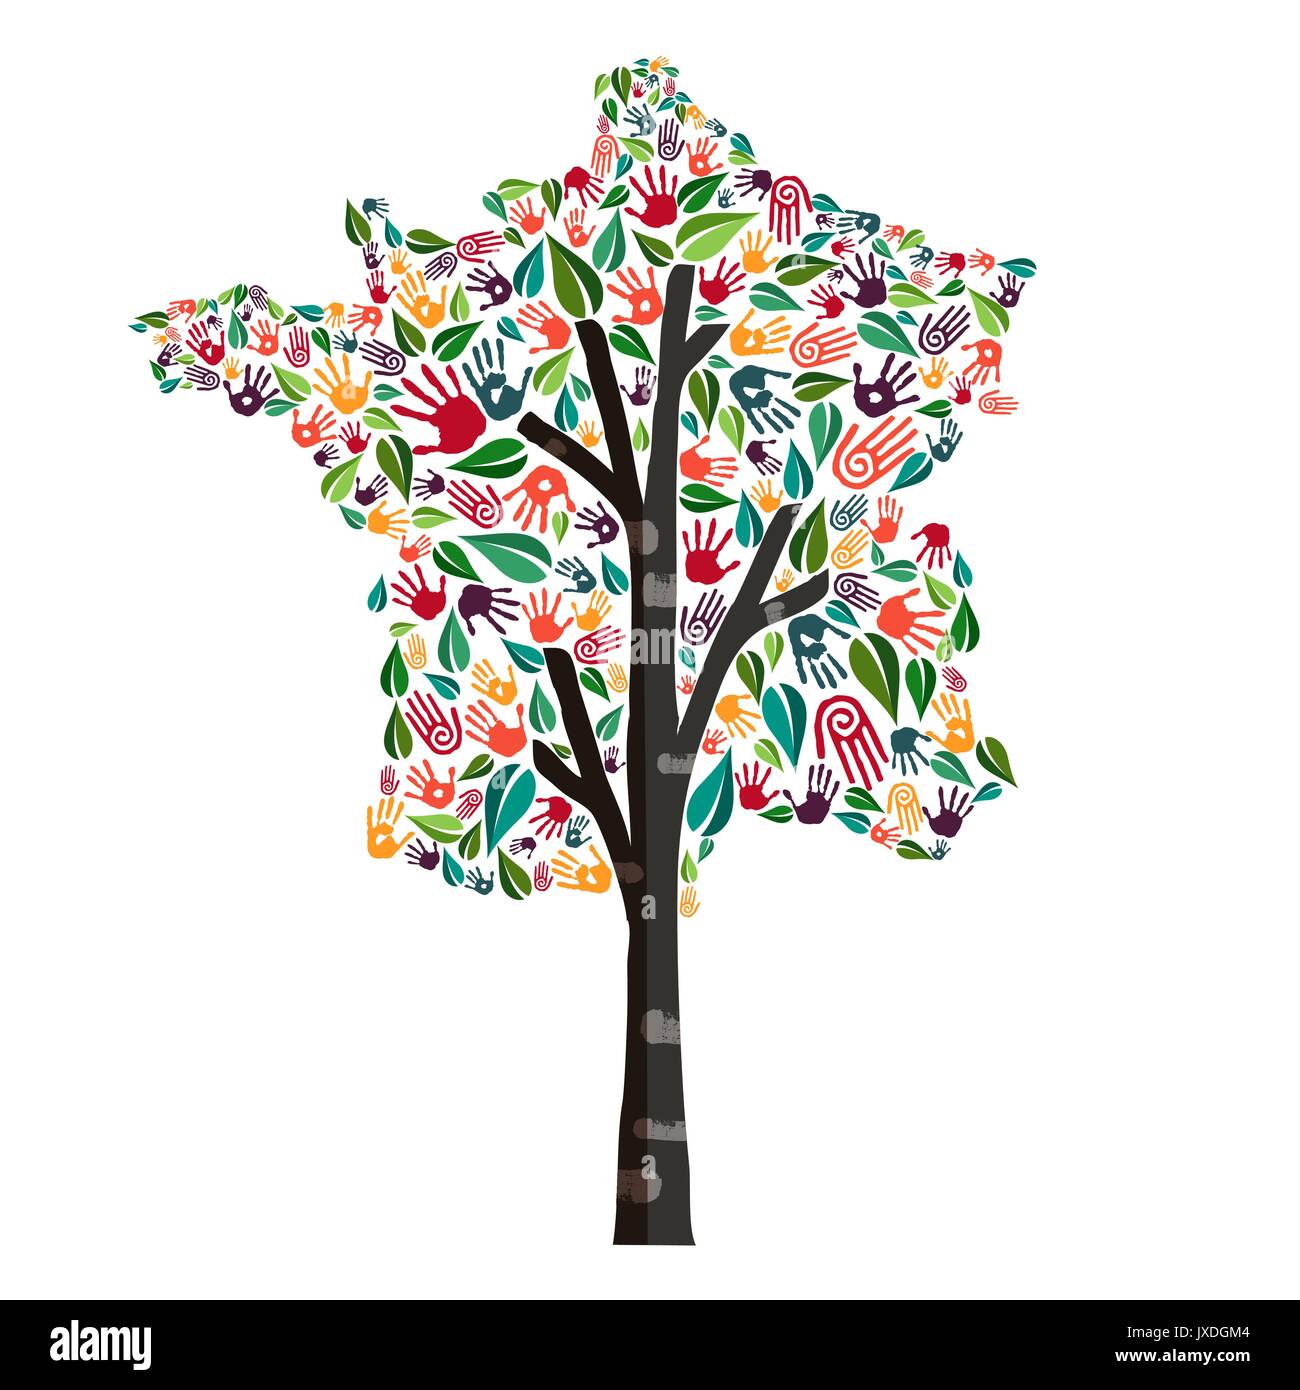 Tree with french country shape and human hand prints. France world help concept illustration for charity work, environment care or social project. EPS Stock Vector